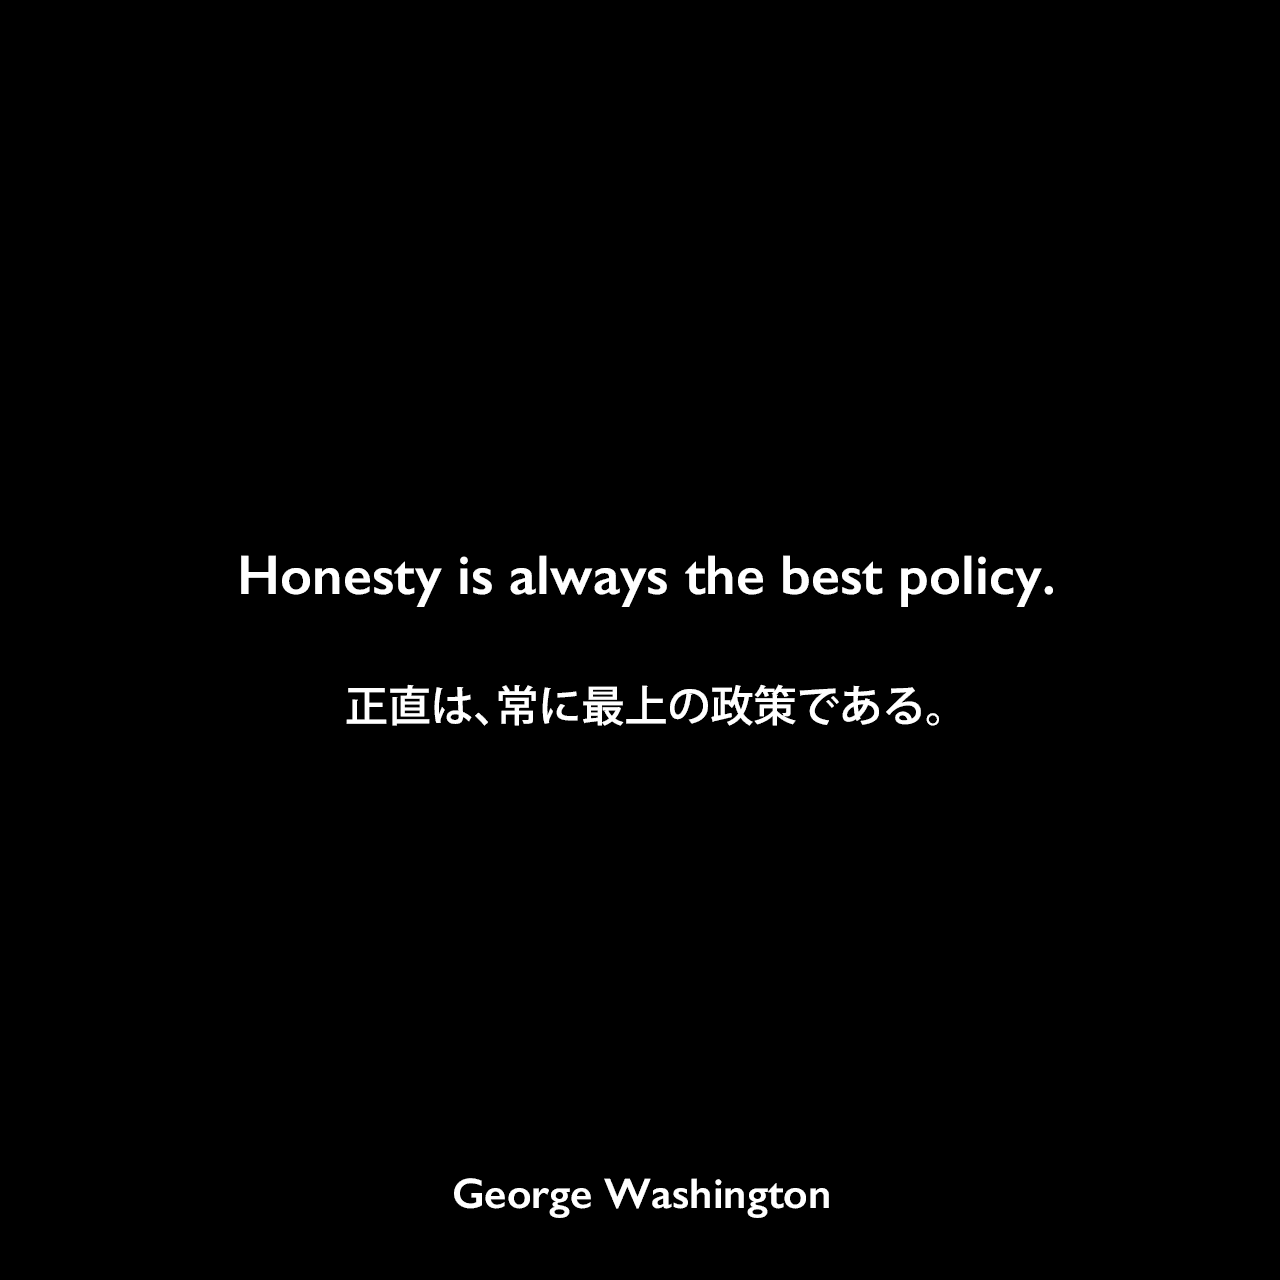 Honesty is always the best policy.正直は、常に最上の政策である。